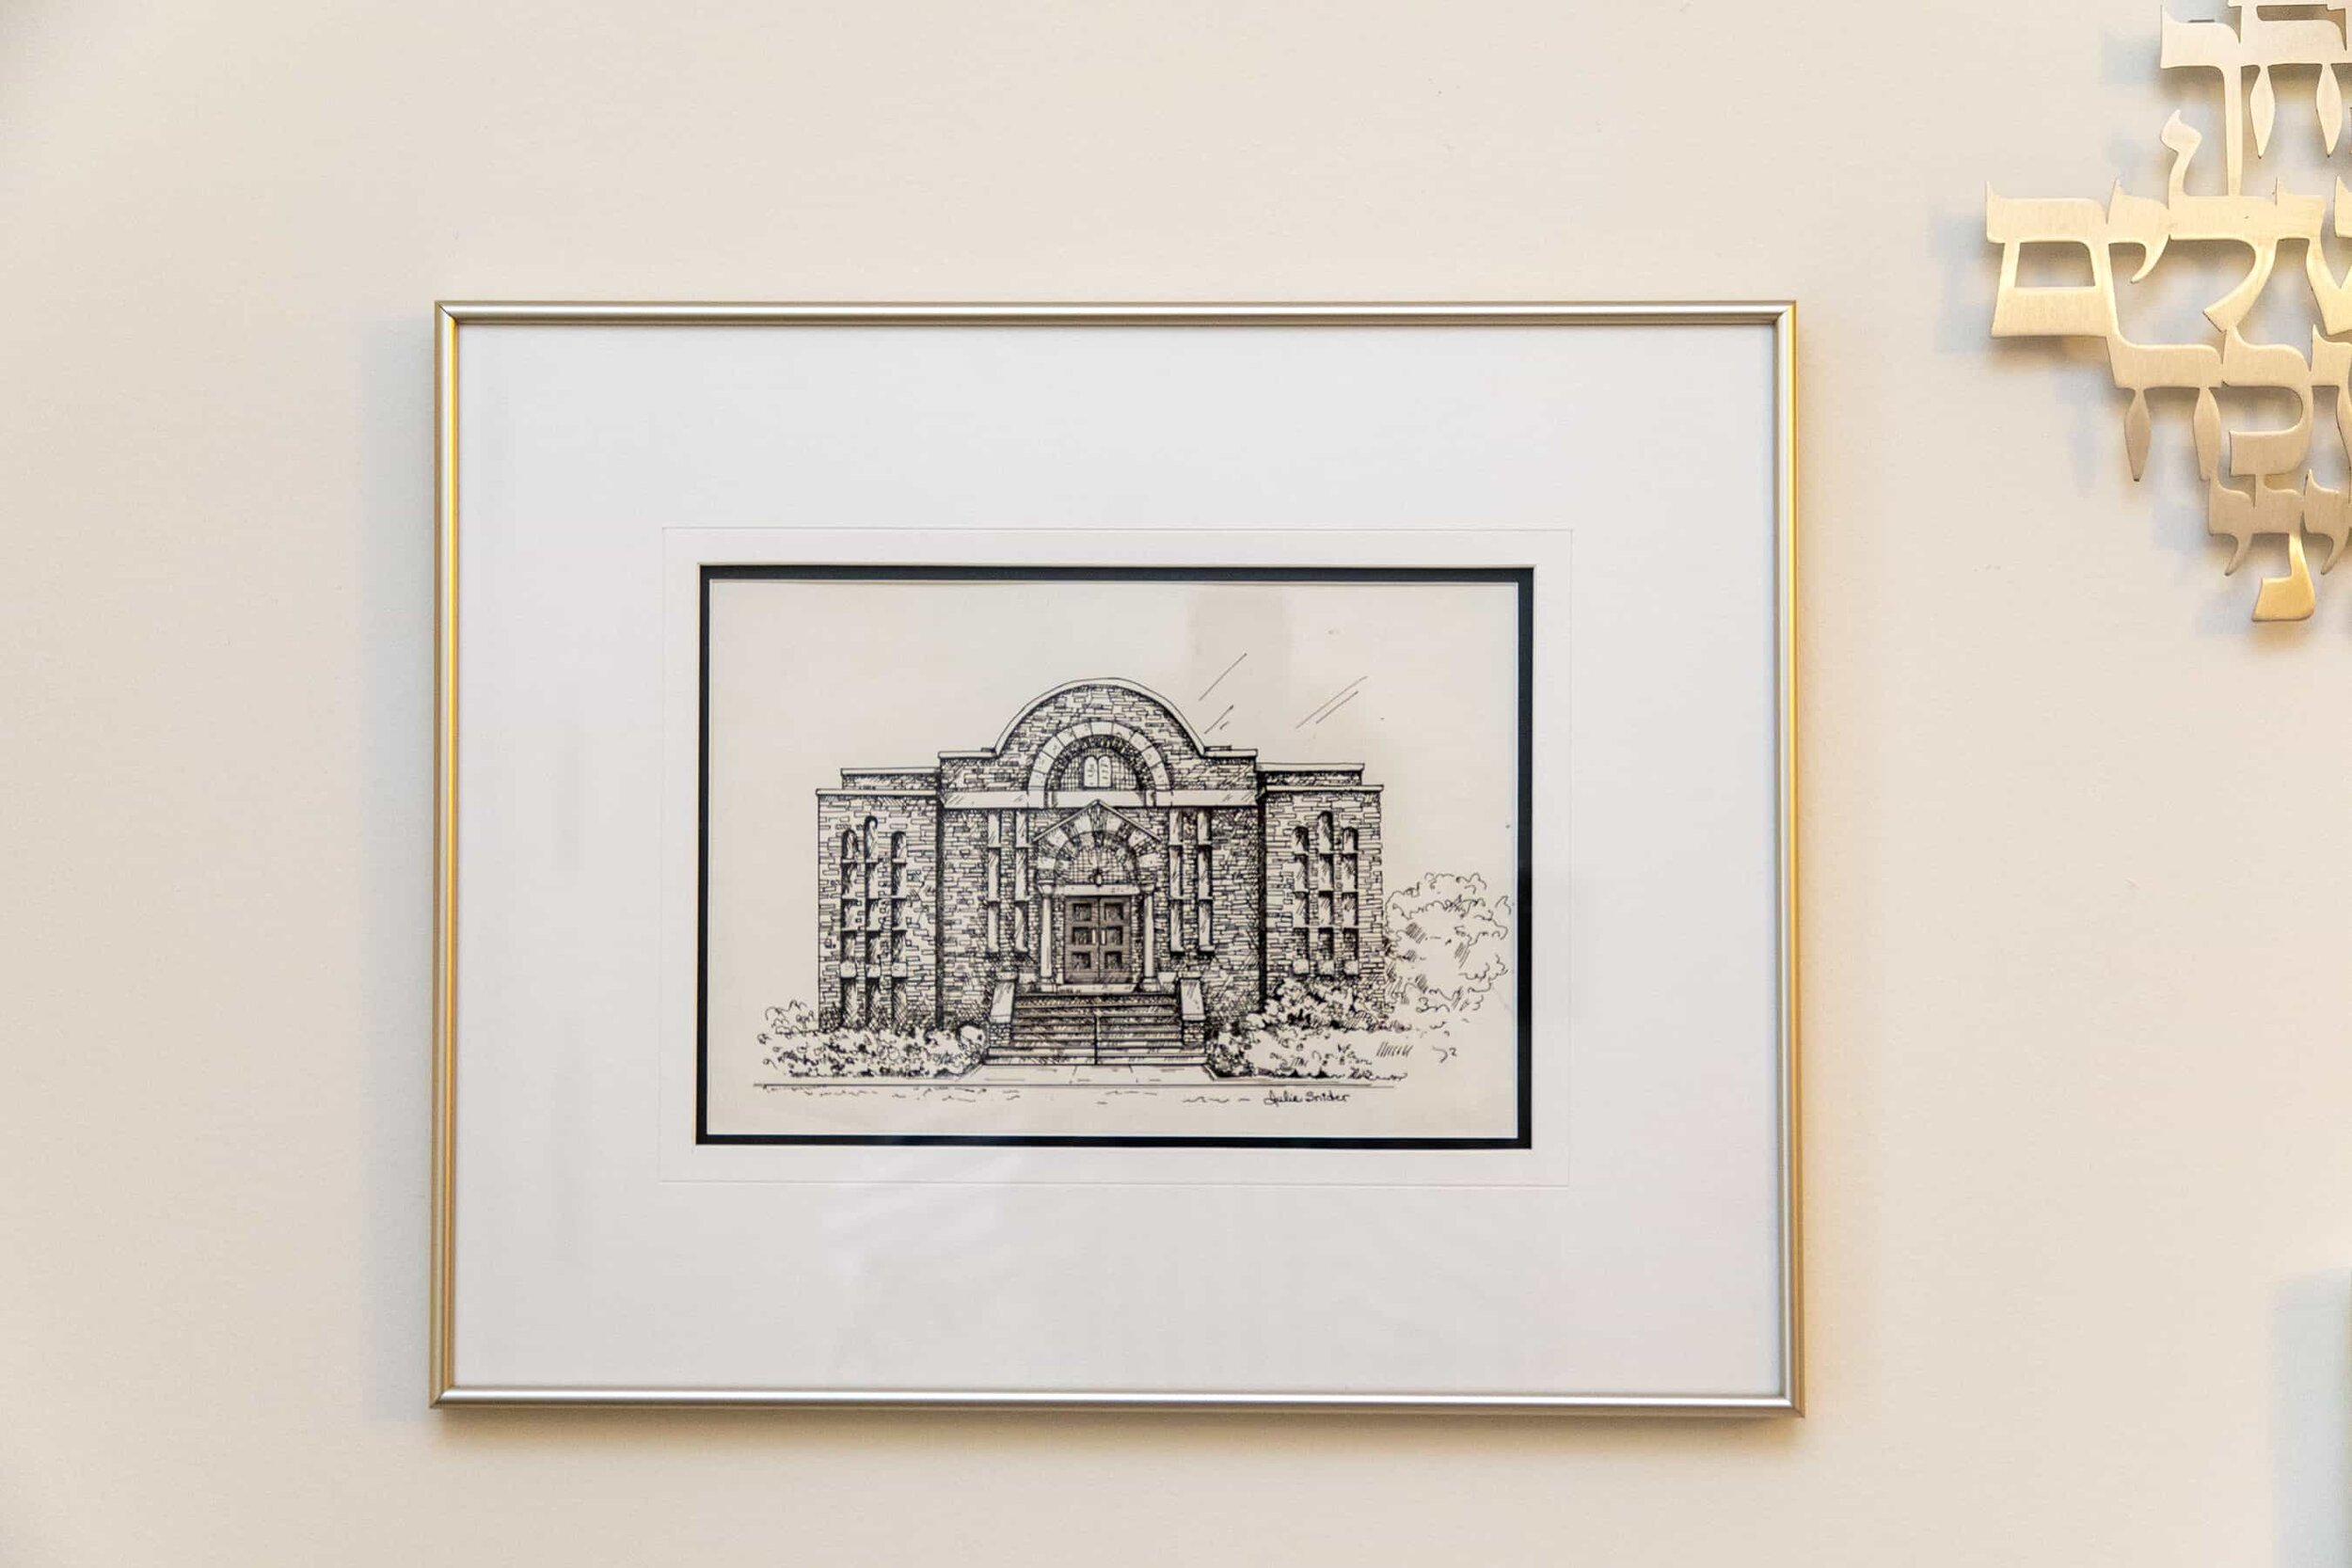 Ink drawing of Gershon’s synagogue when he lived in St. Catherines, Ontario